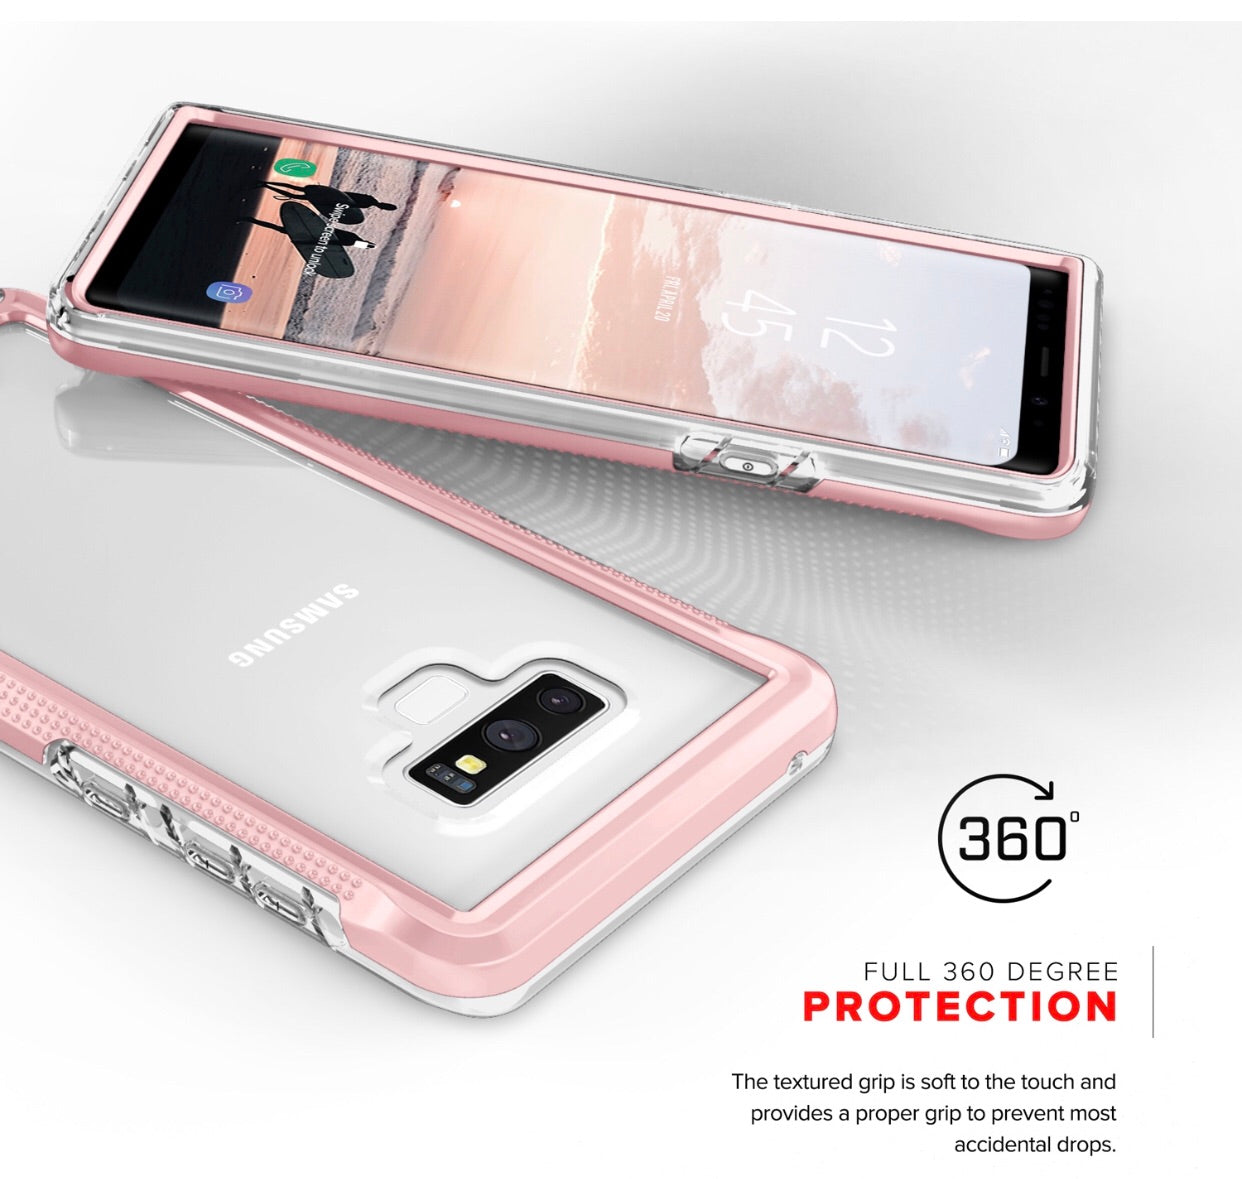 Samsung Galaxy Note 9 Zizo ION Triple Layered Hybrid Case w/ Tempered Glass Screen Protector - Rose Gold / Silver